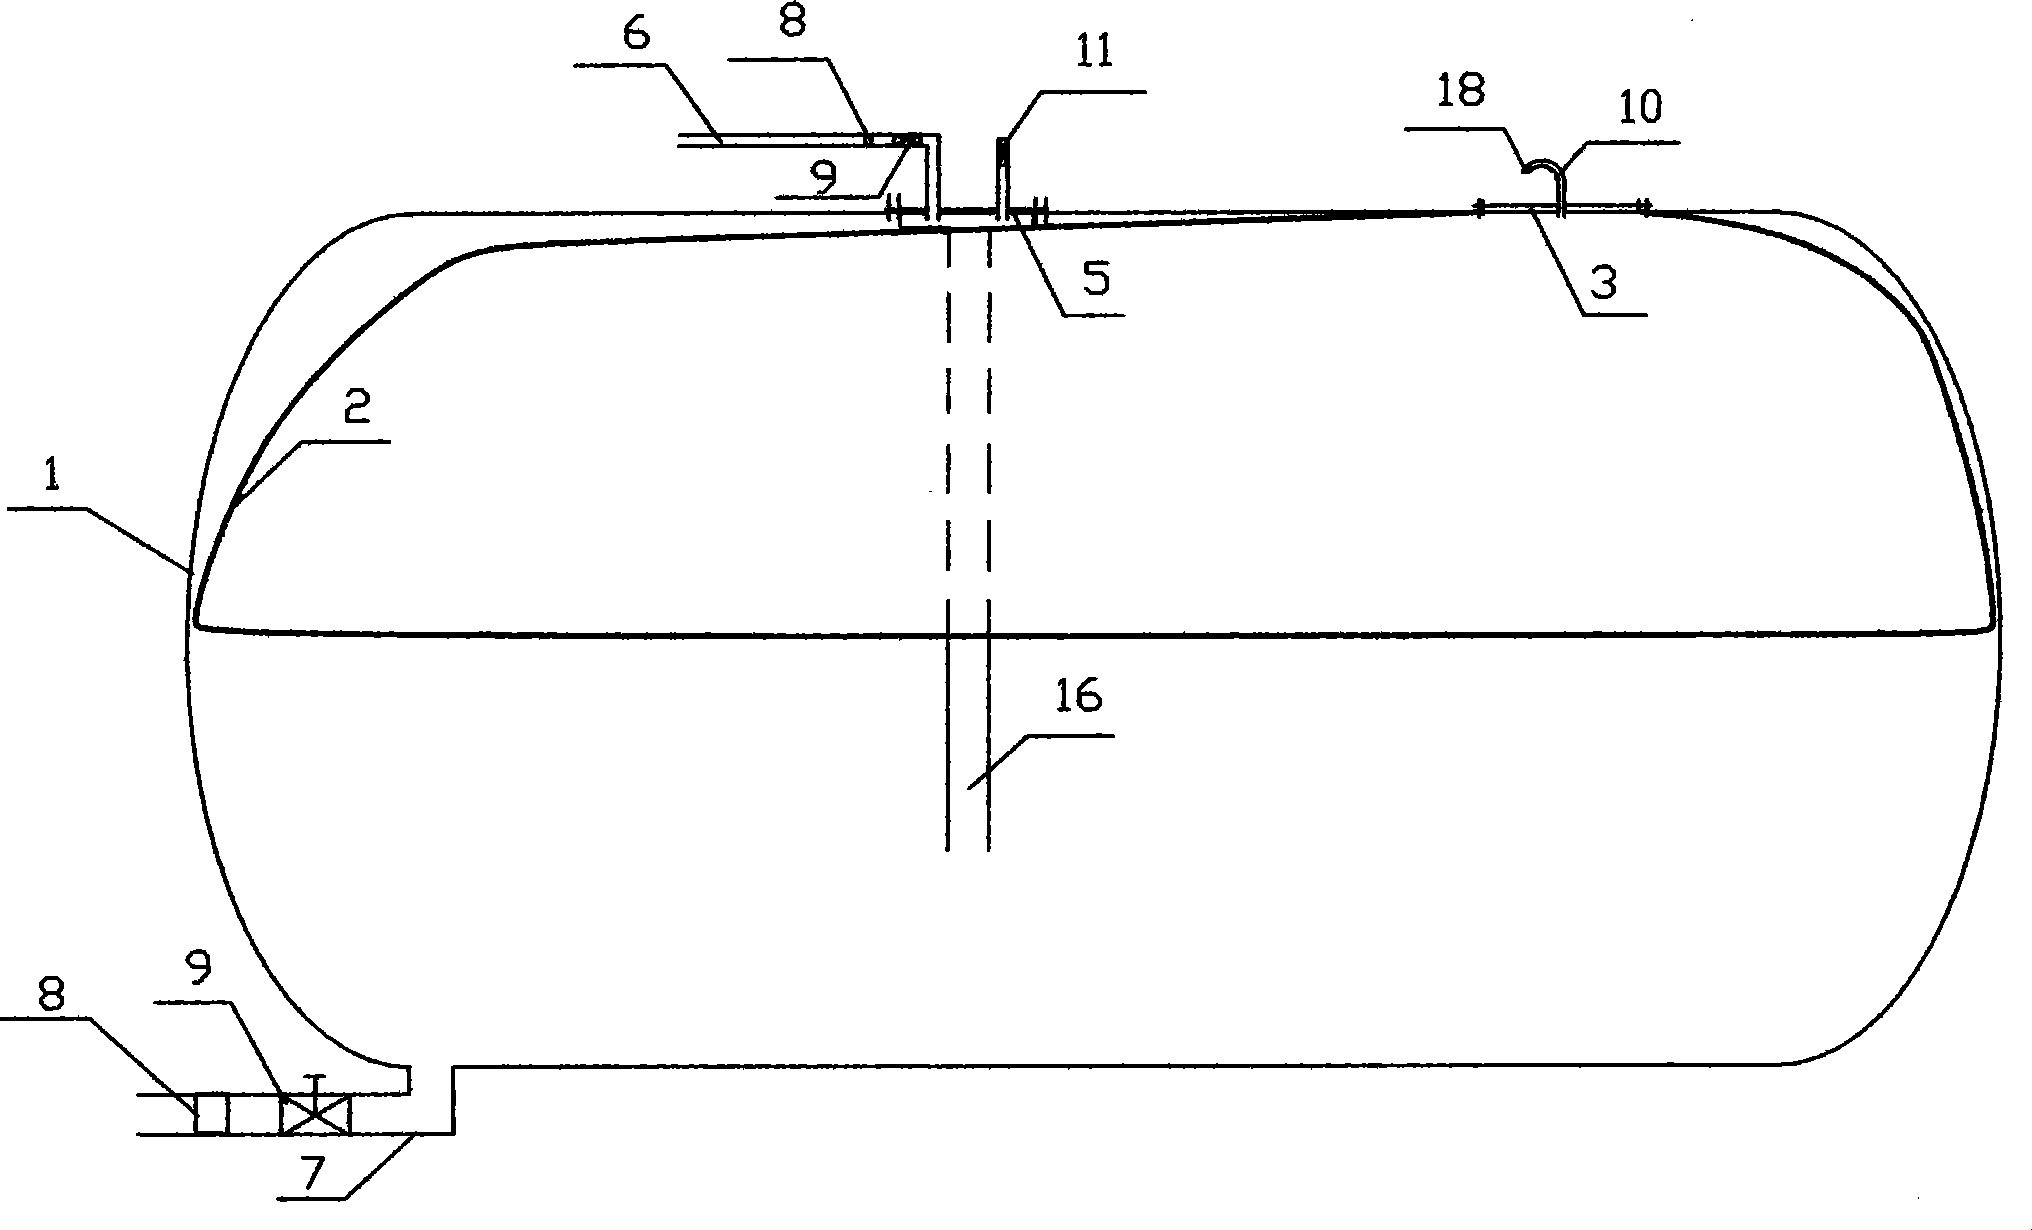 Film isolation type oil storage and transportation apparatus